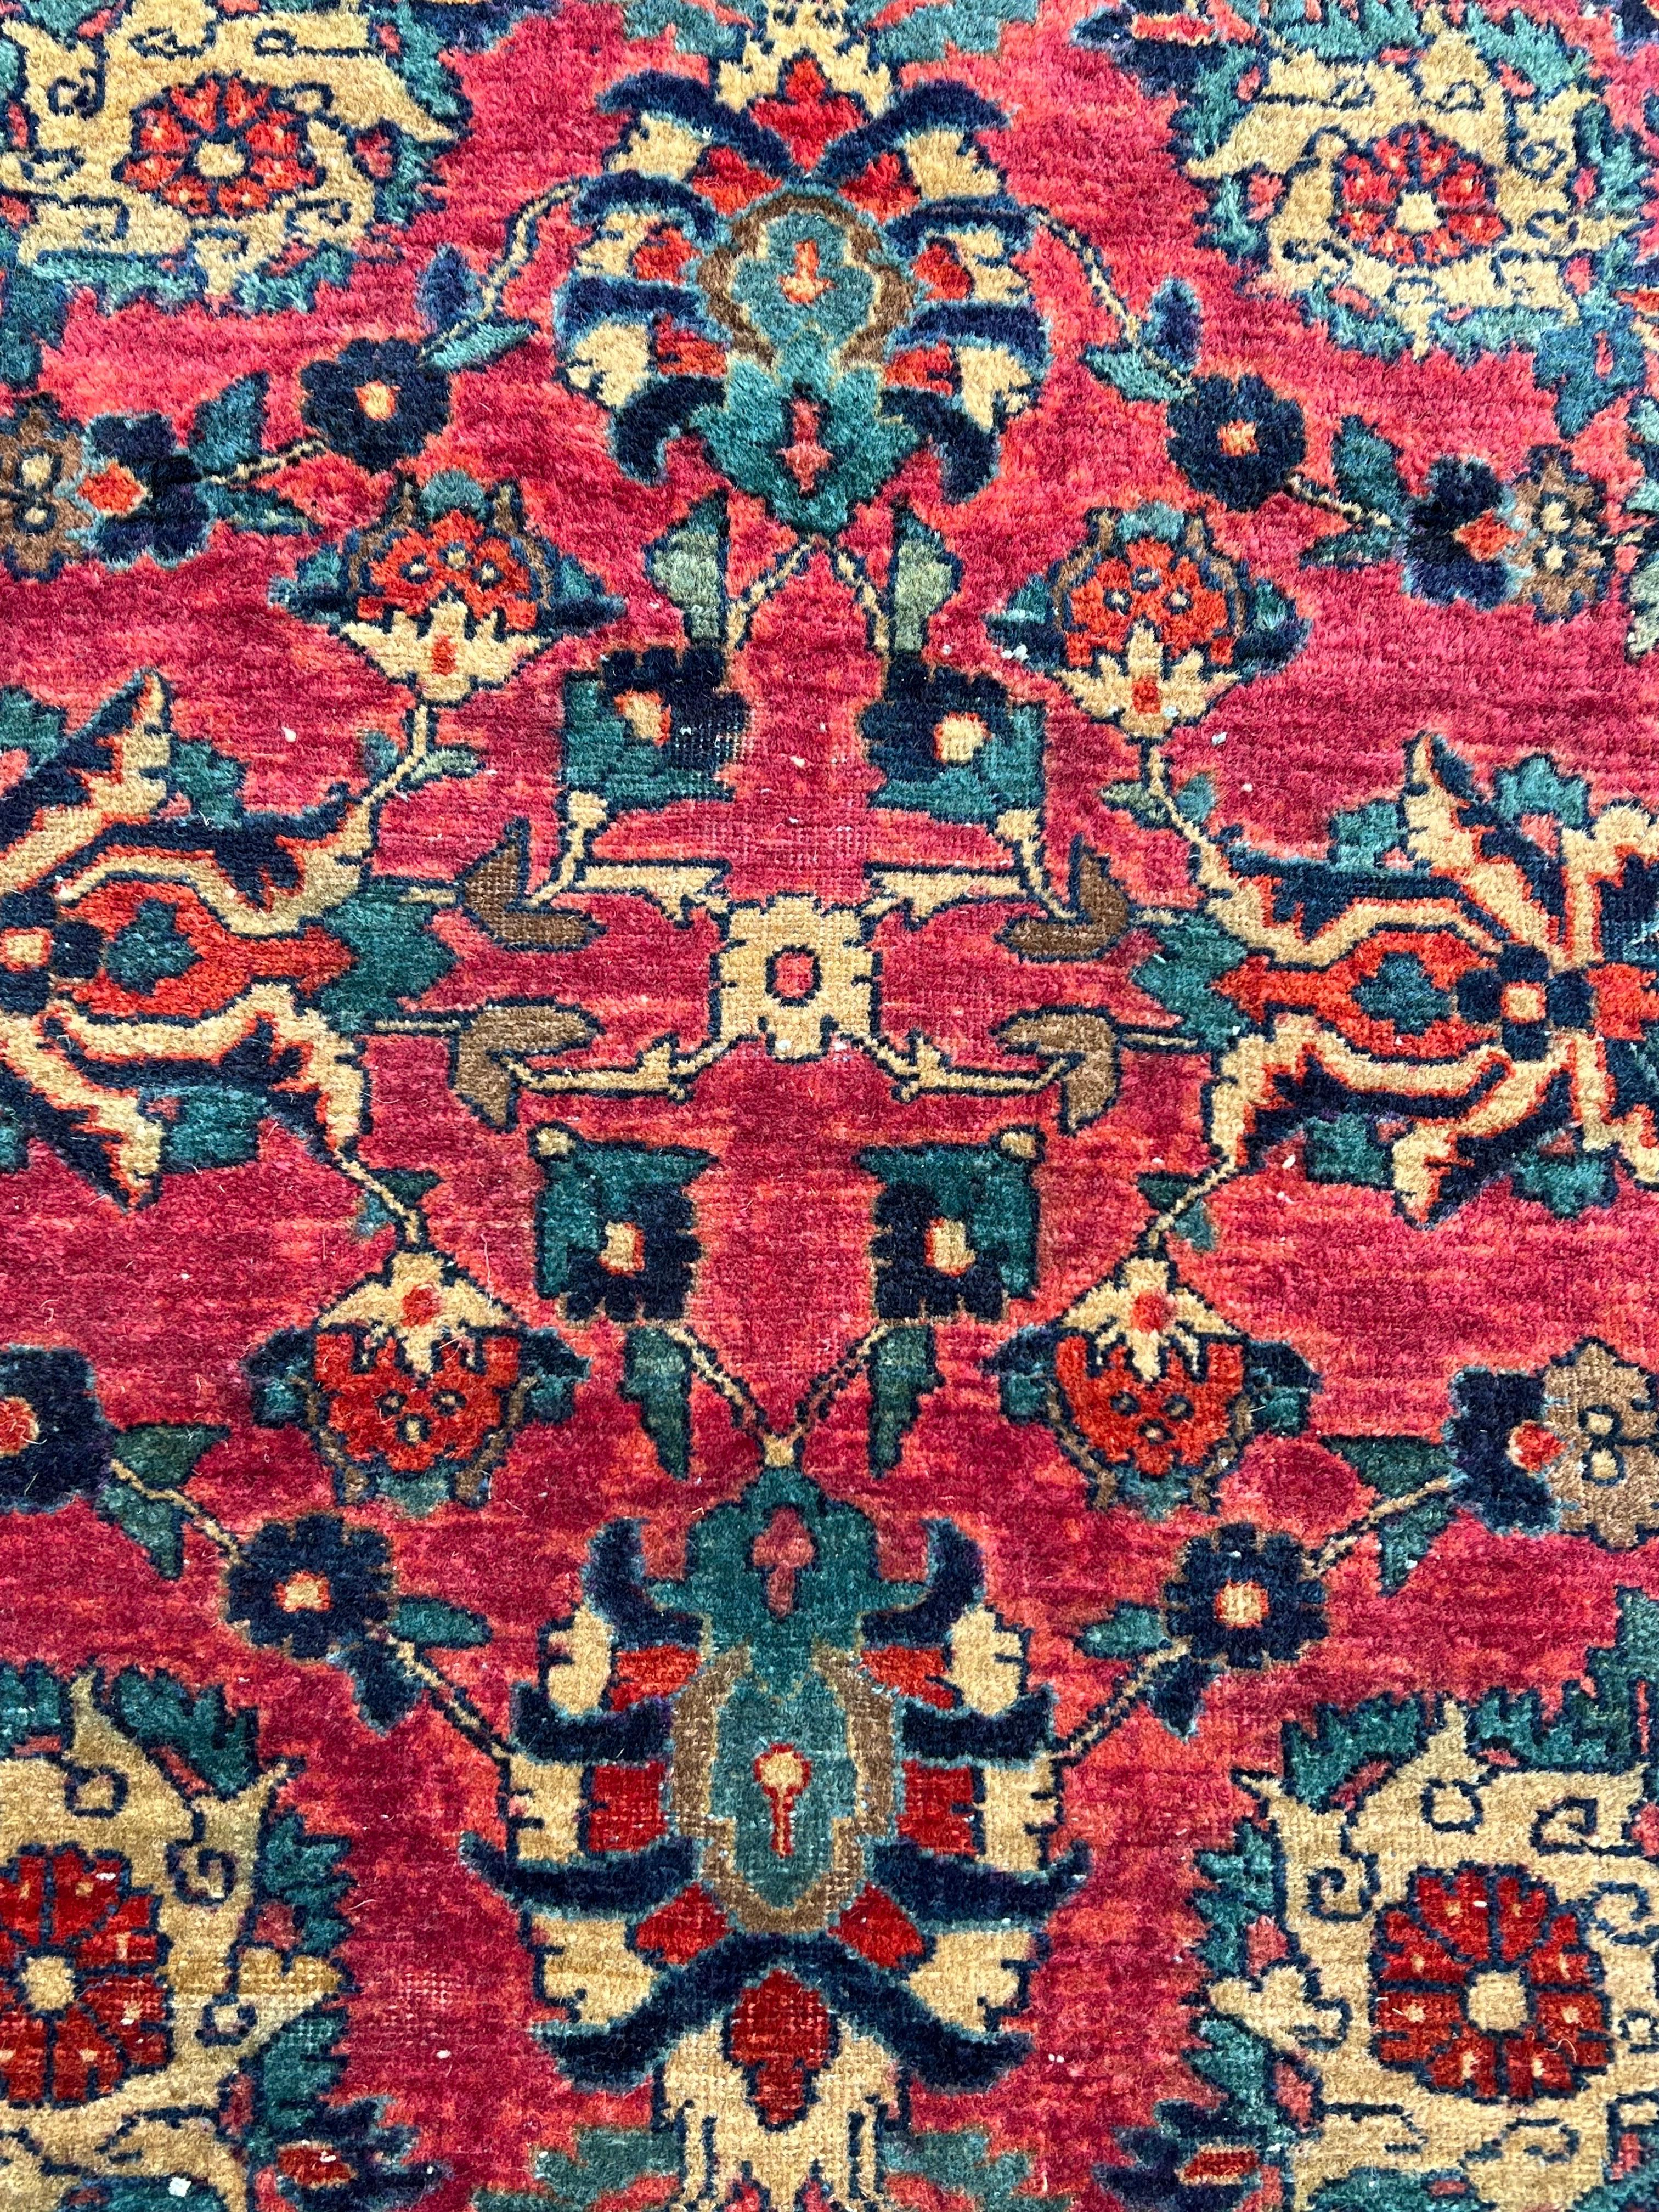 Hand-Woven Vegetable Dyed Mid 20th Century Persian Rug 5' x 7' For Sale